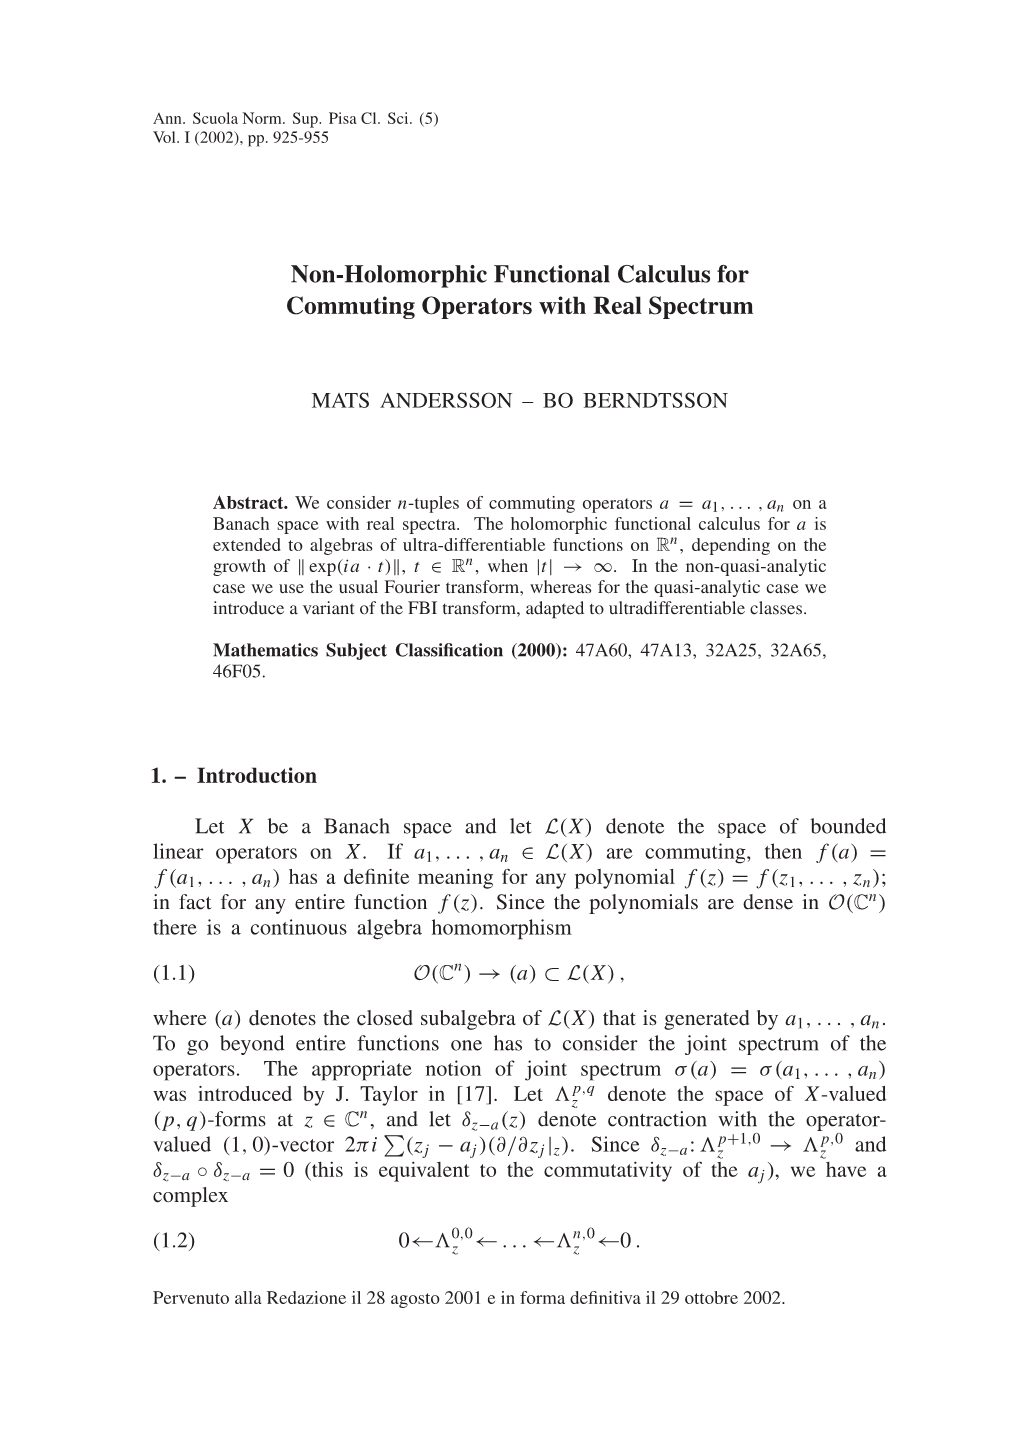 Non-Holomorphic Functional Calculus for Commuting Operators with Real Spectrum